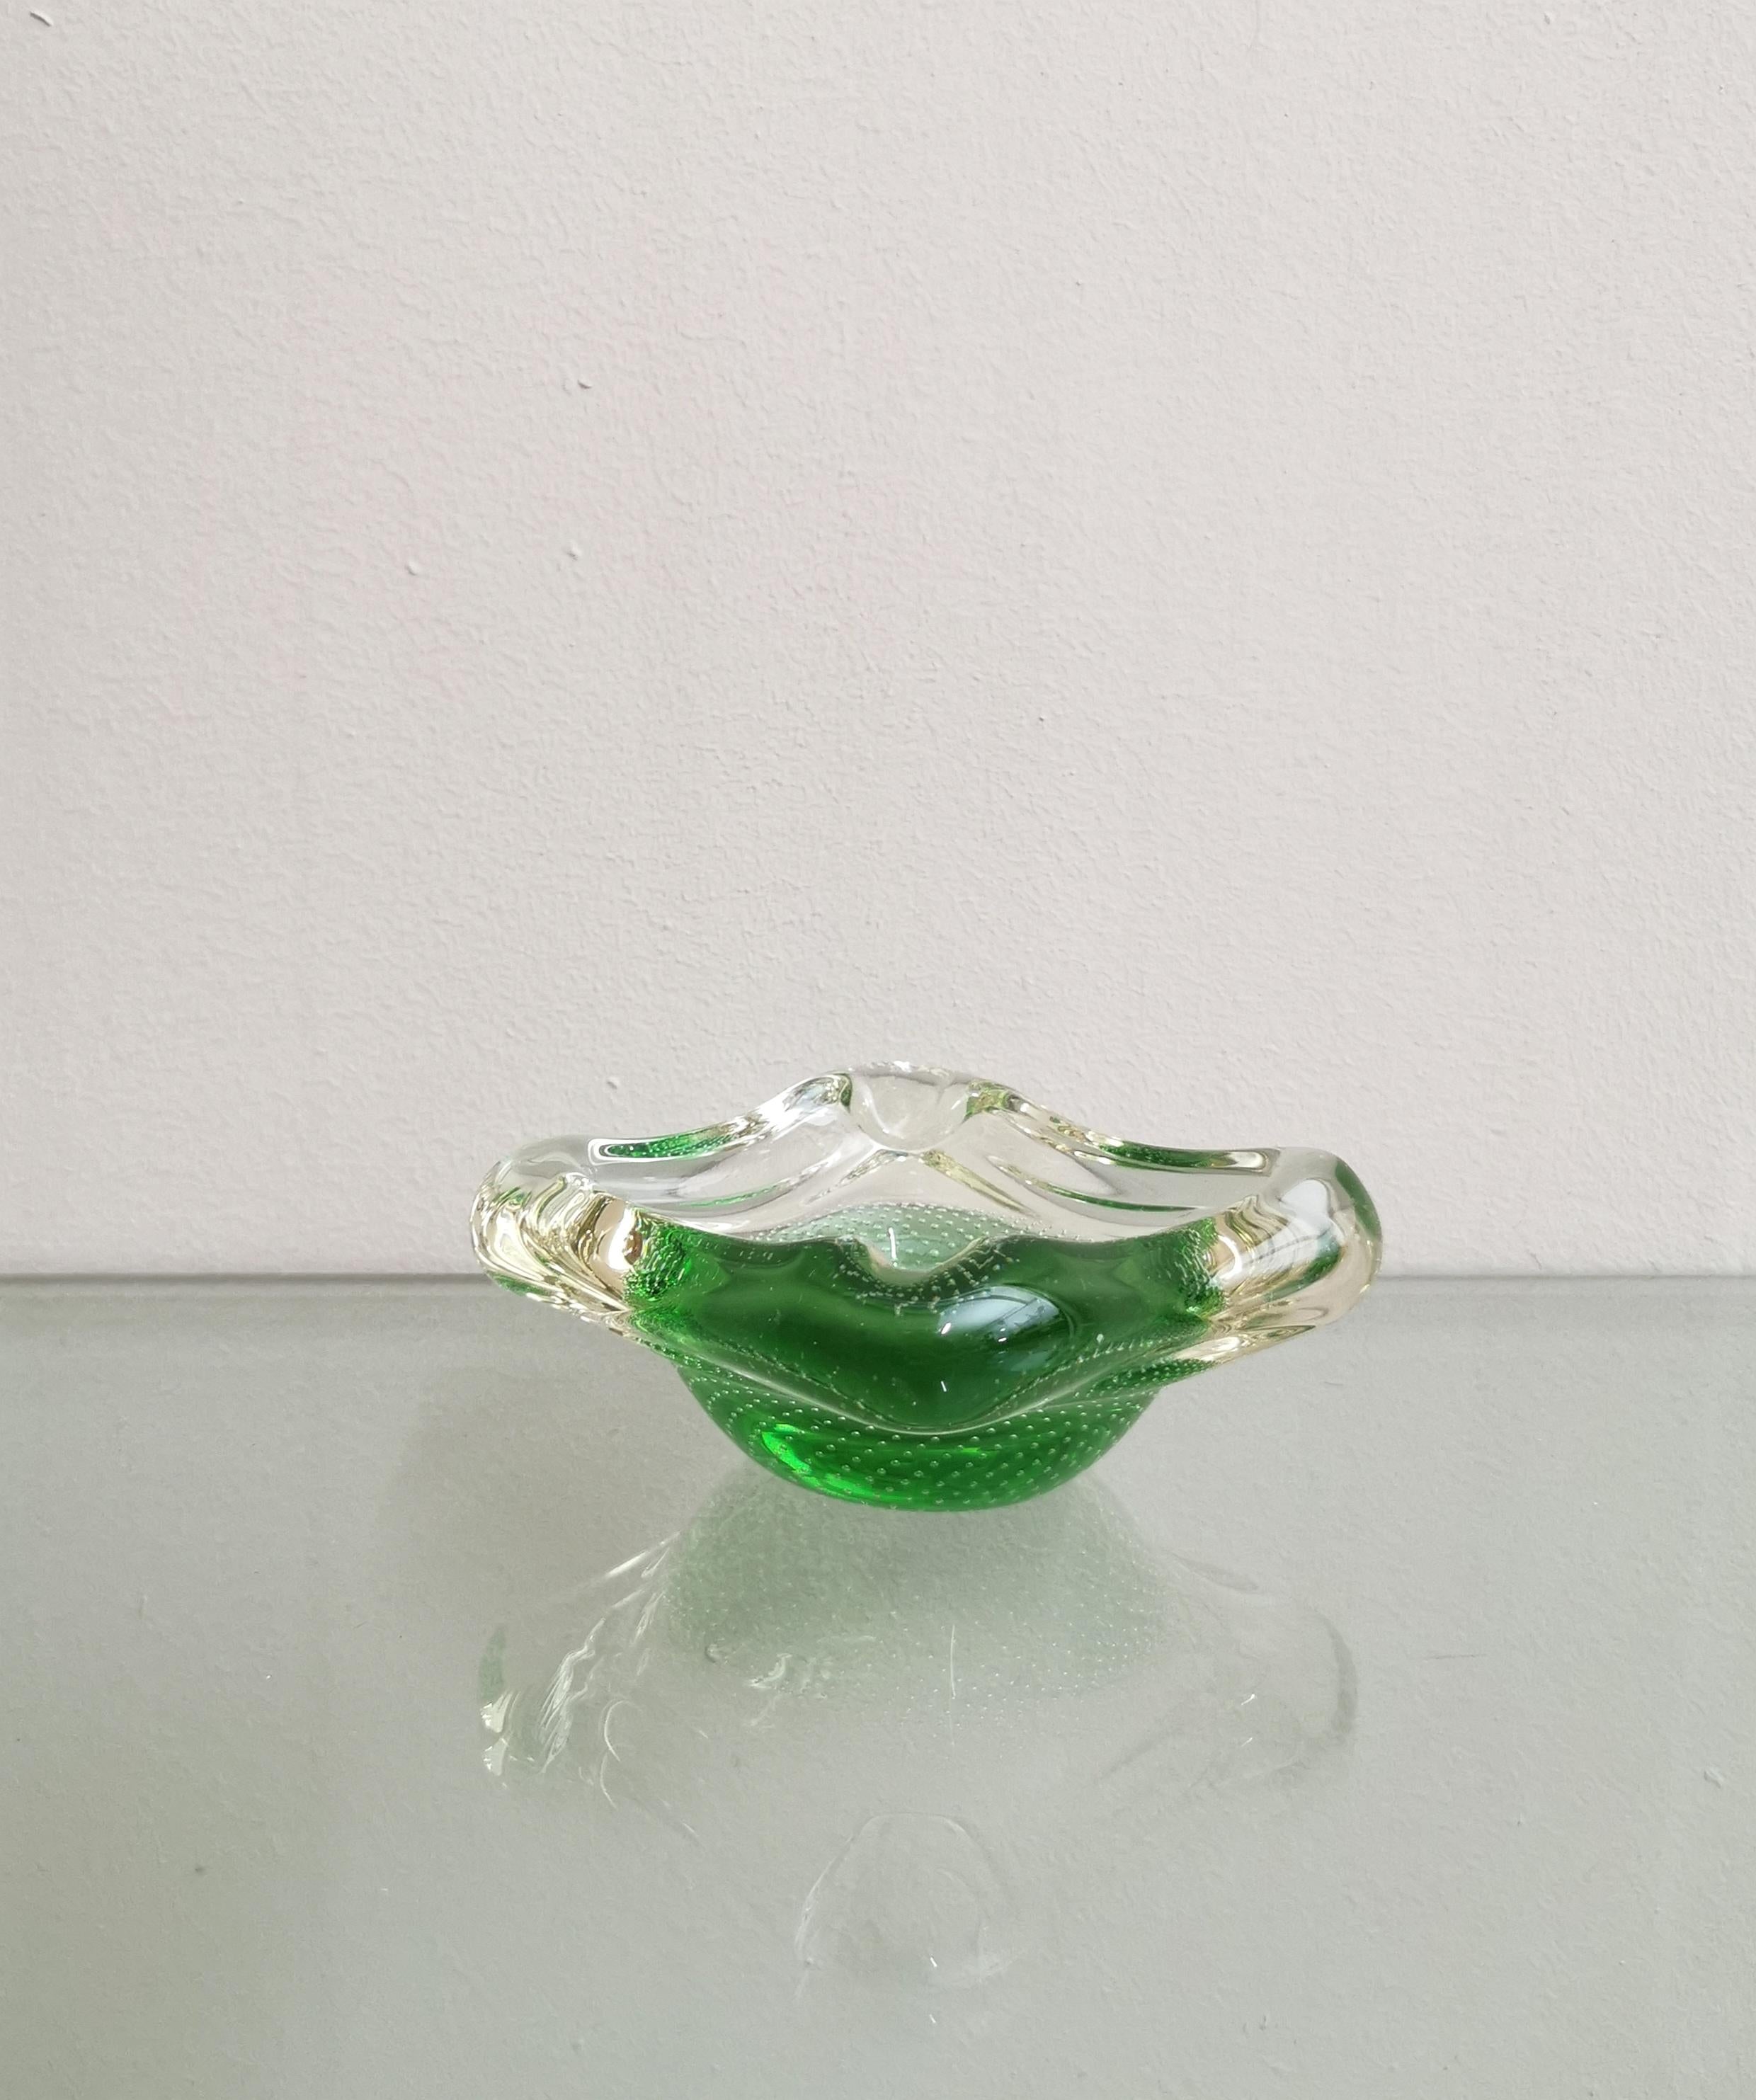 Ashtray and pocket emptier with particular shapes attributed to the renowned Italian designer Archimede Seguso produced in the 1950s. The ashtray was made of blown Murano glass with the famous sommerso technique and with the particular combination